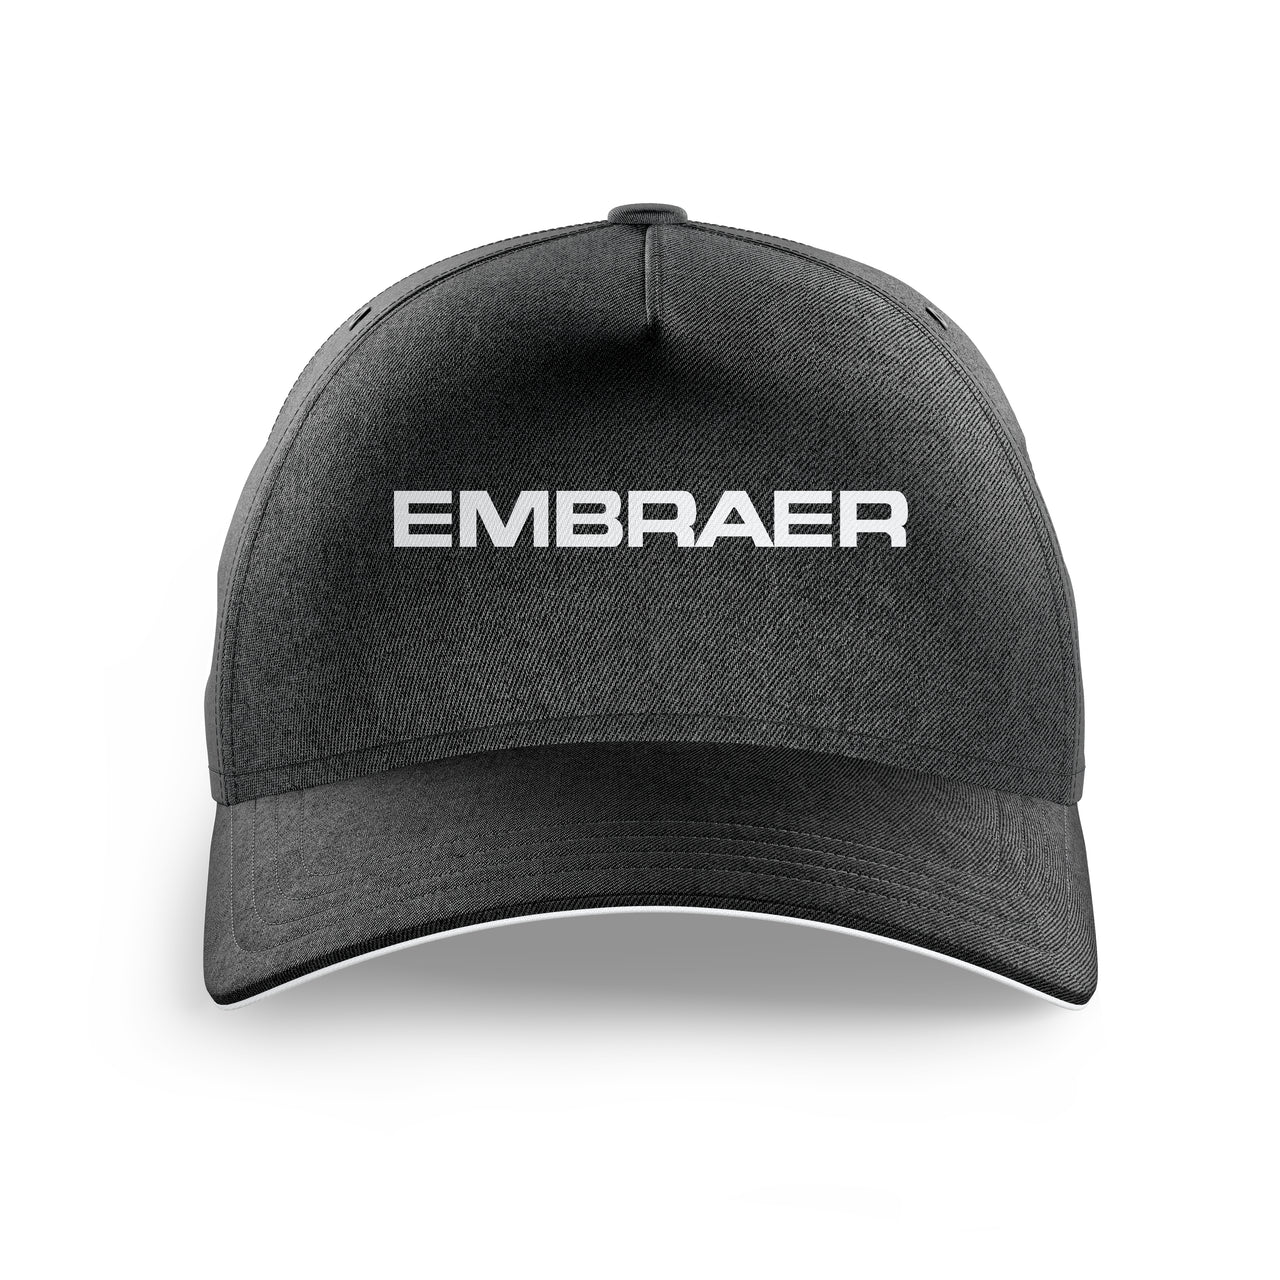 Embraer & Text Printed Hats